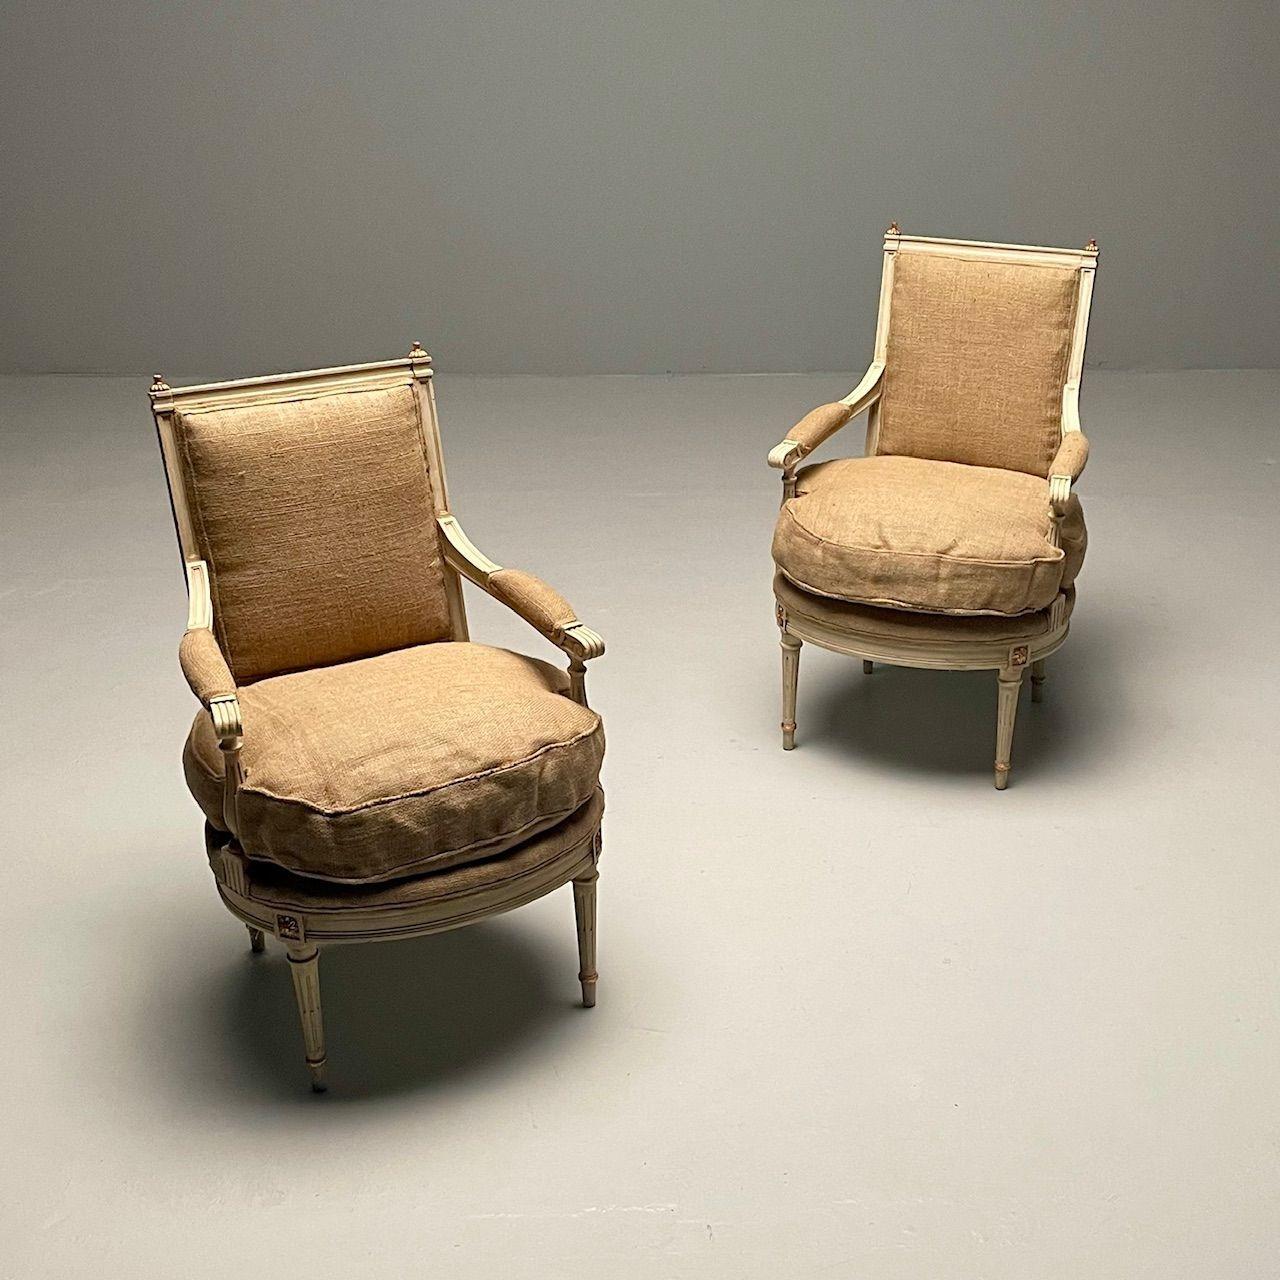 Maison Jansen Style, French Louis XVI, Arm Chairs, Giltwood, White Paint, Burlap In Good Condition For Sale In Stamford, CT